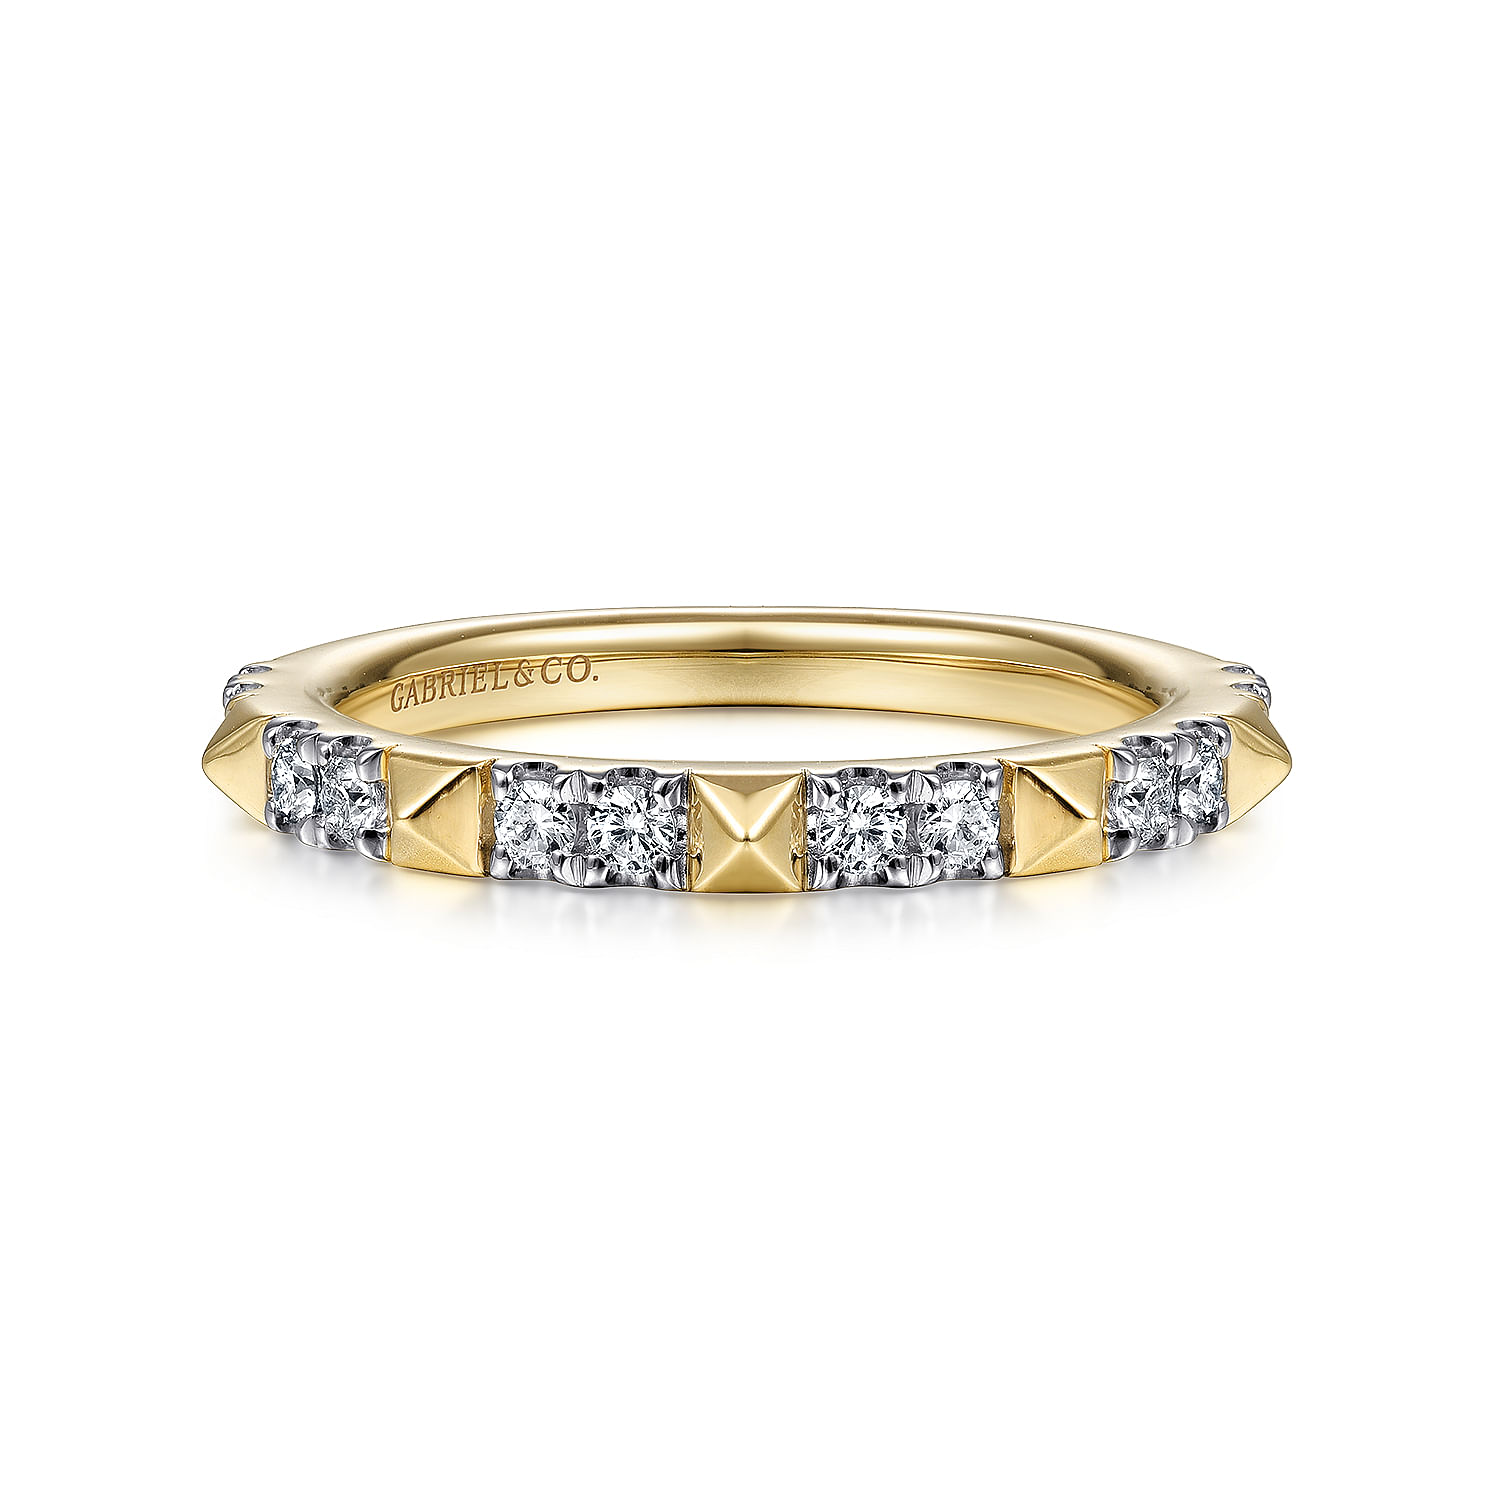 Gabriel - 14K Yellow Gold Alternating Diamond and Pyramid Stackable Ring